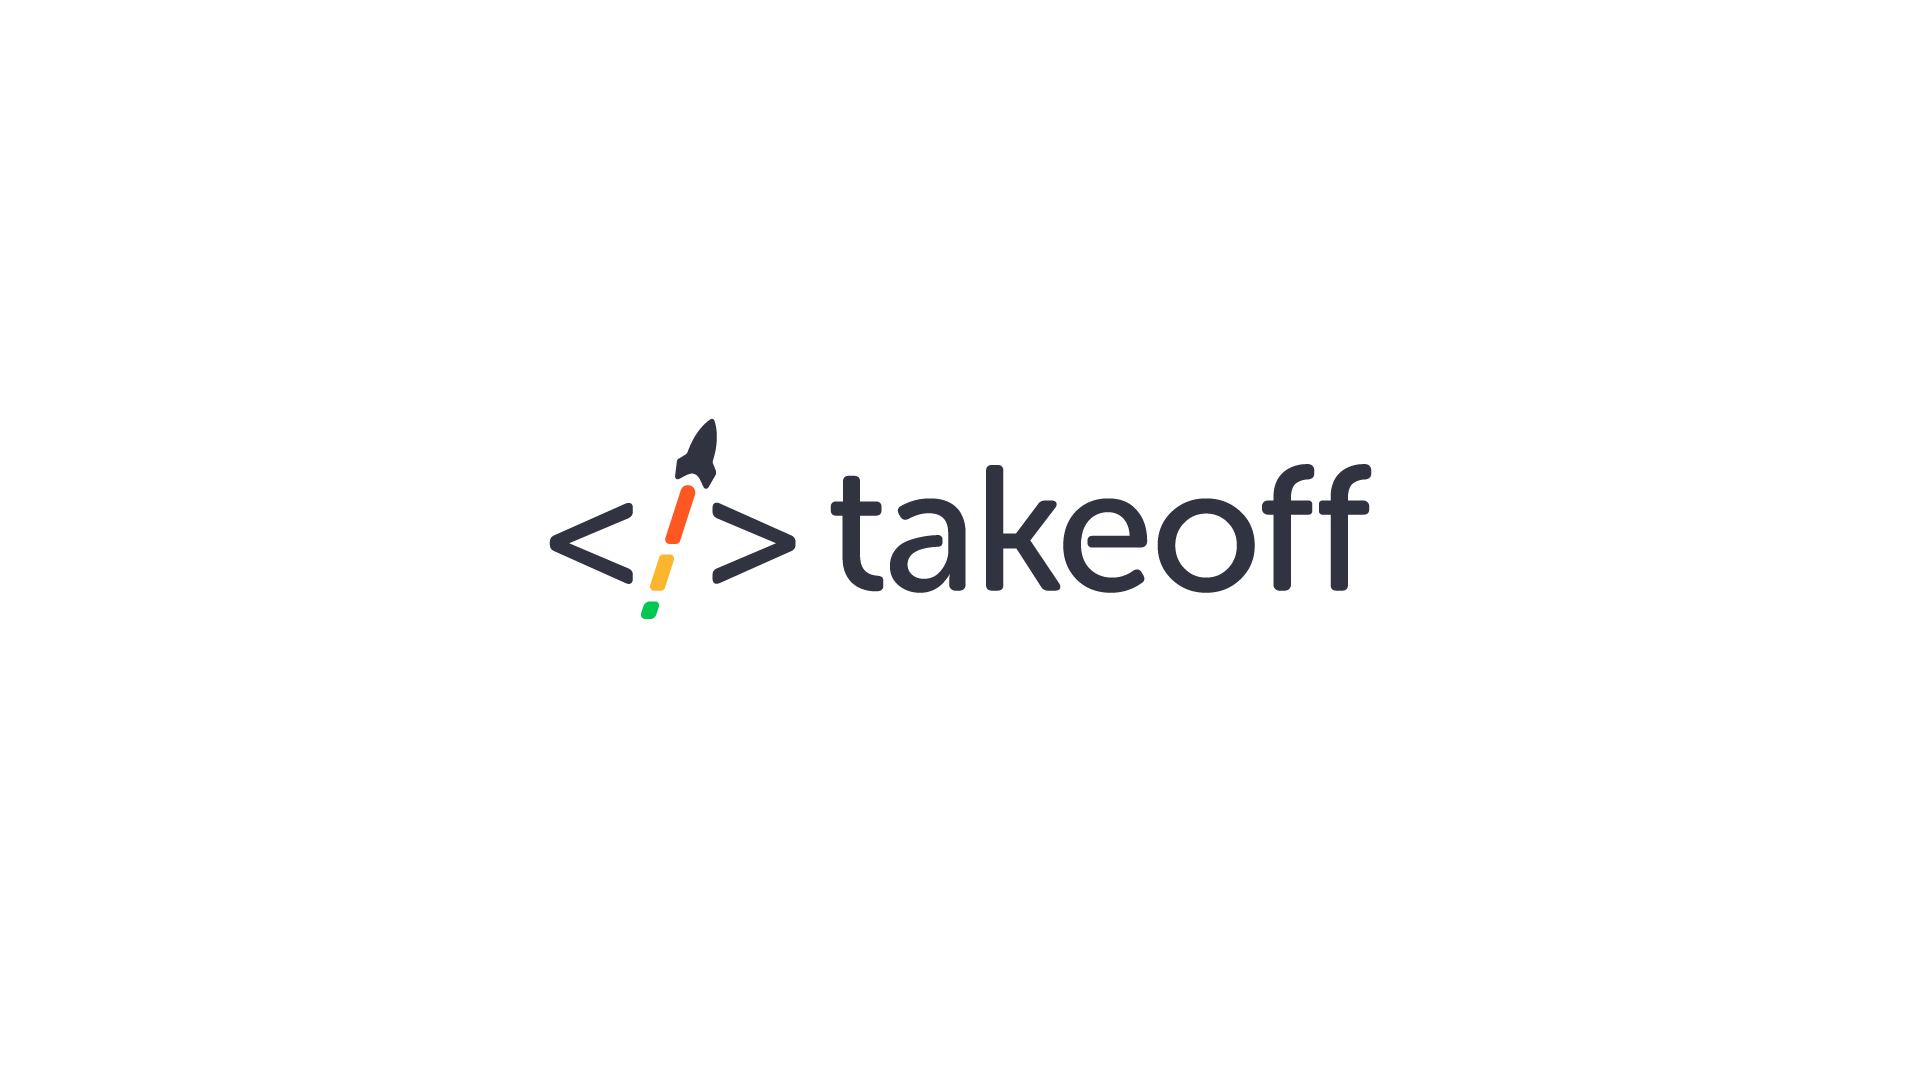 Takeoff - Web Development Agency logo, code brackets with a rocket inside, symbolizing launch and technological advancement